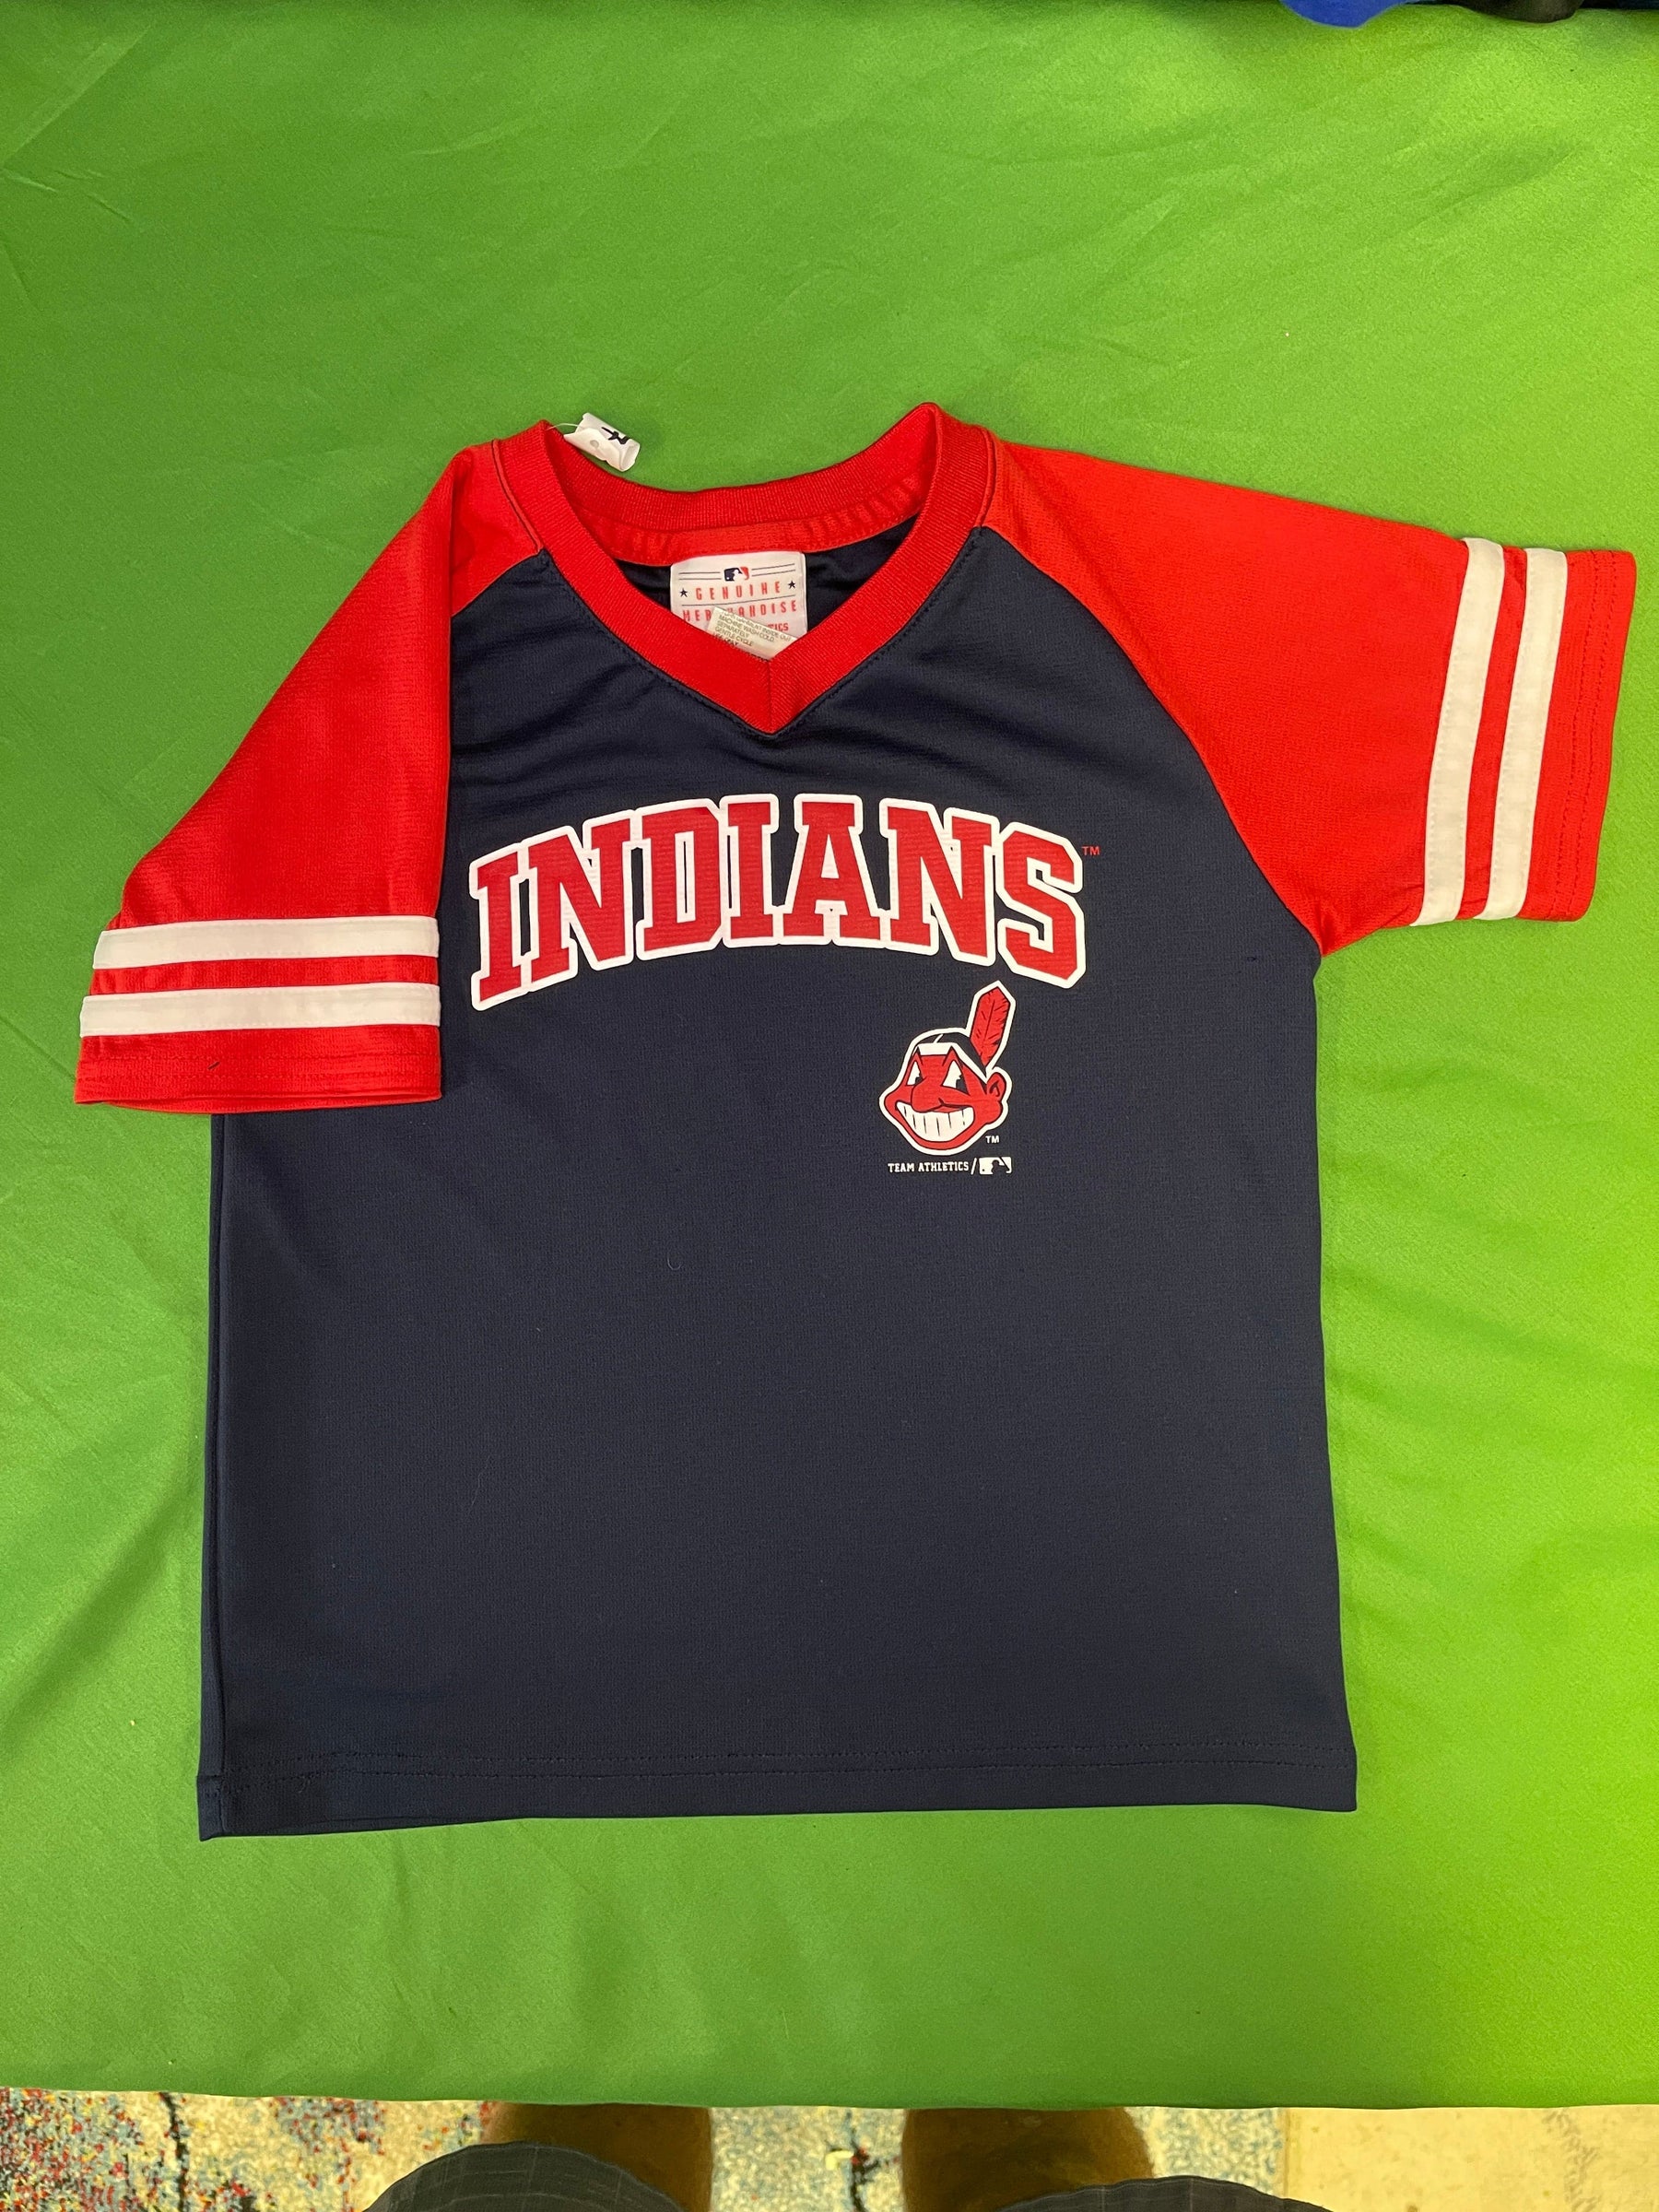 MLB Cleveland Guardians (Indians) Team Athletics Jersey-Style T-Shirt Youth X-Small 5-6